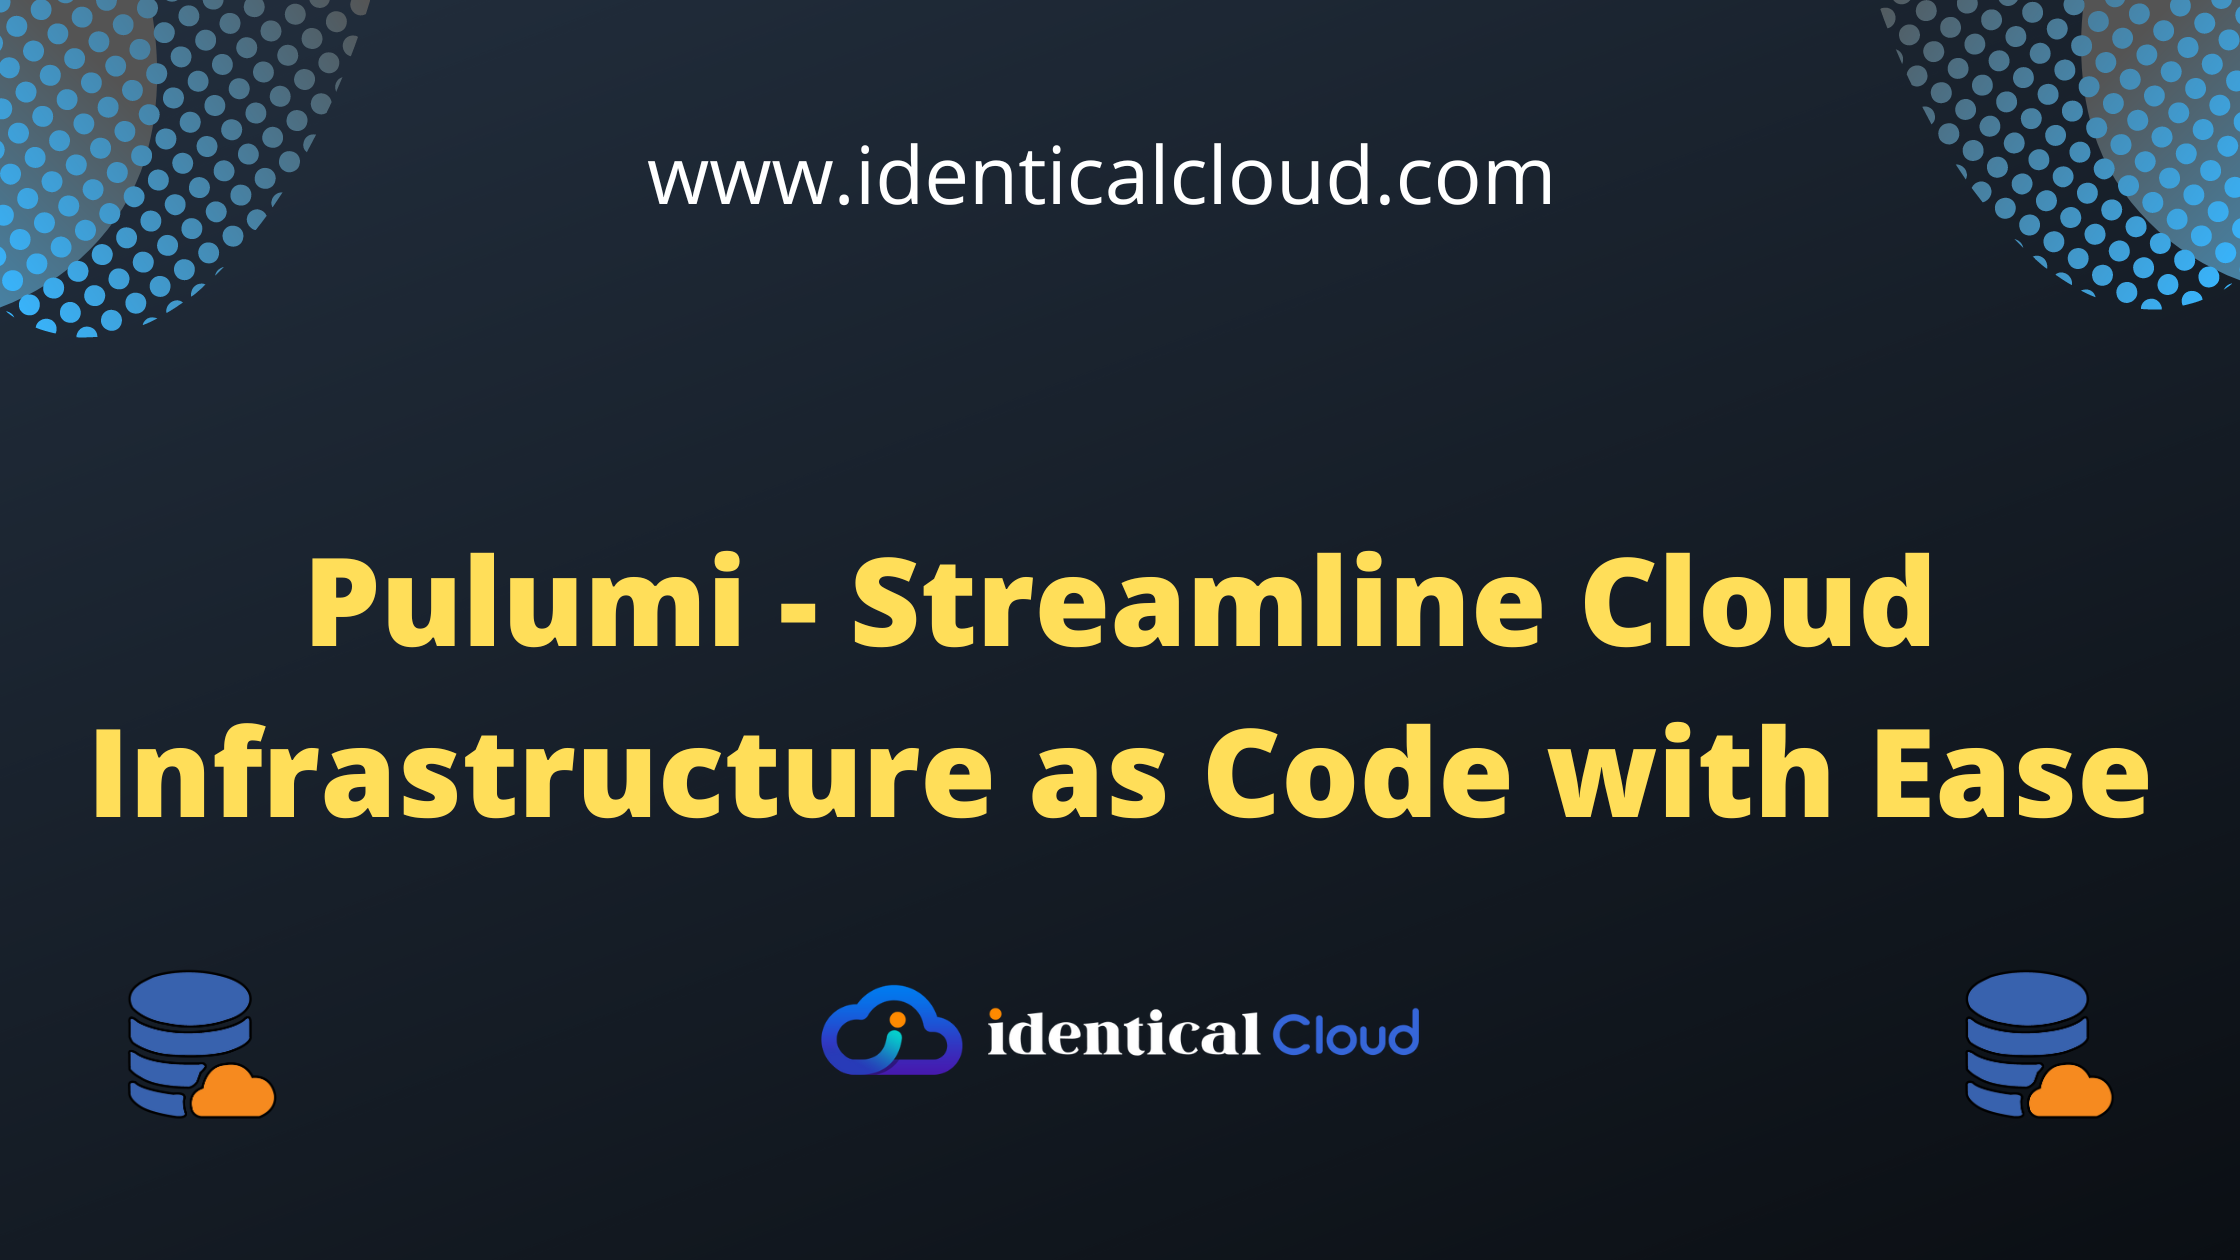 Pulumi - Streamline Cloud Infrastructure as Code with Ease - identicalcloud.com